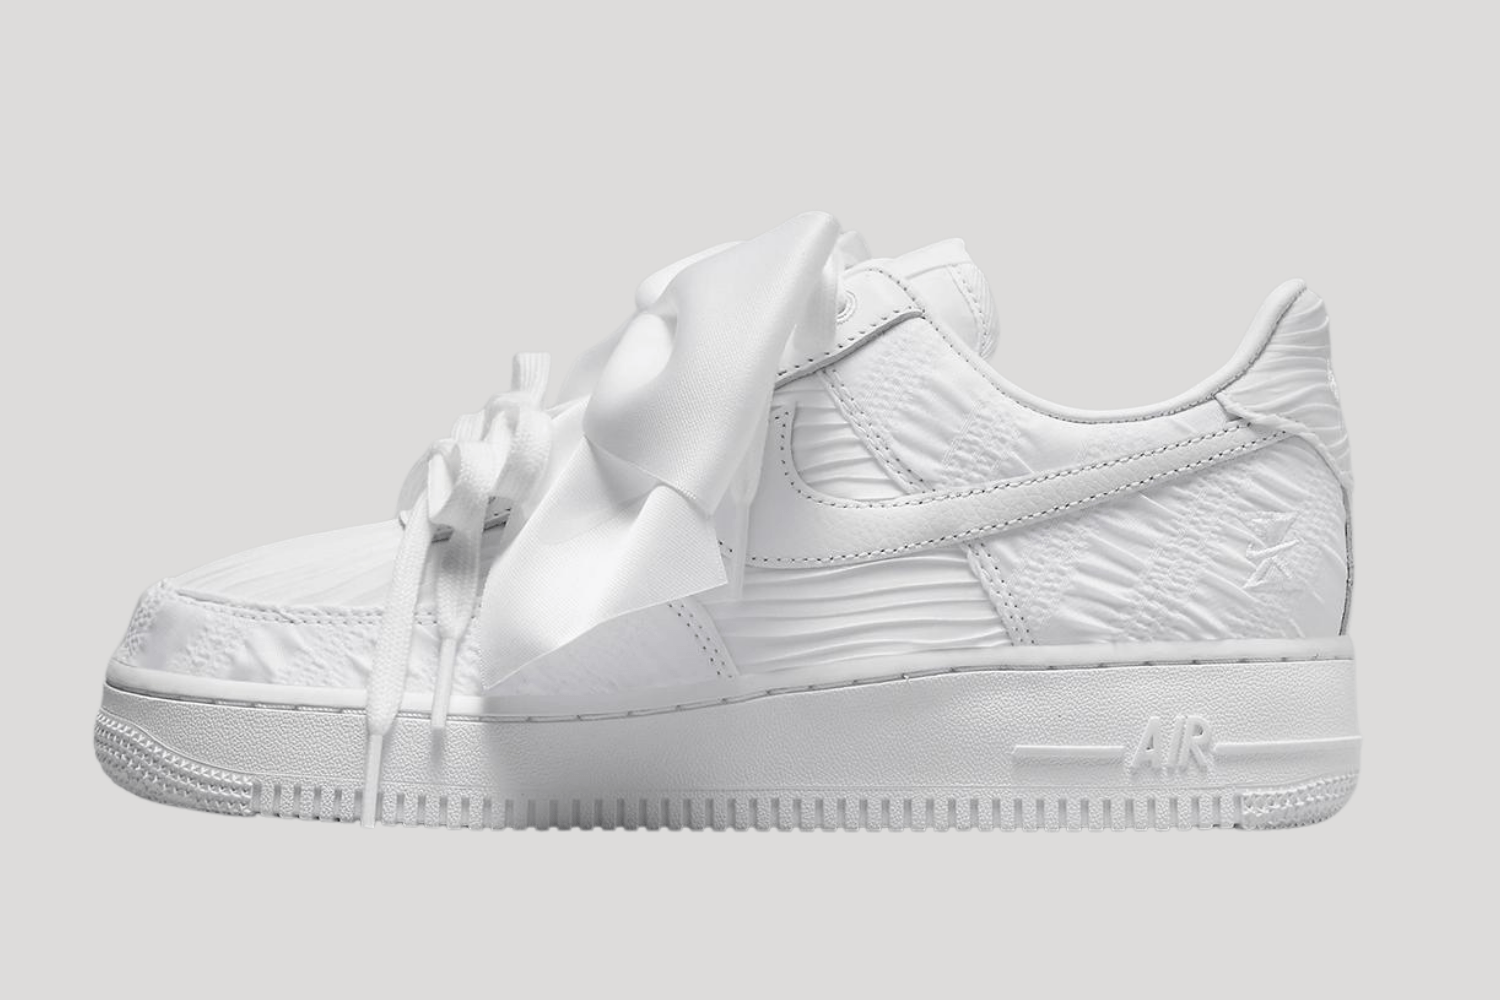 Nike Air Force 1 Low gets a big bow on this women's exclusive